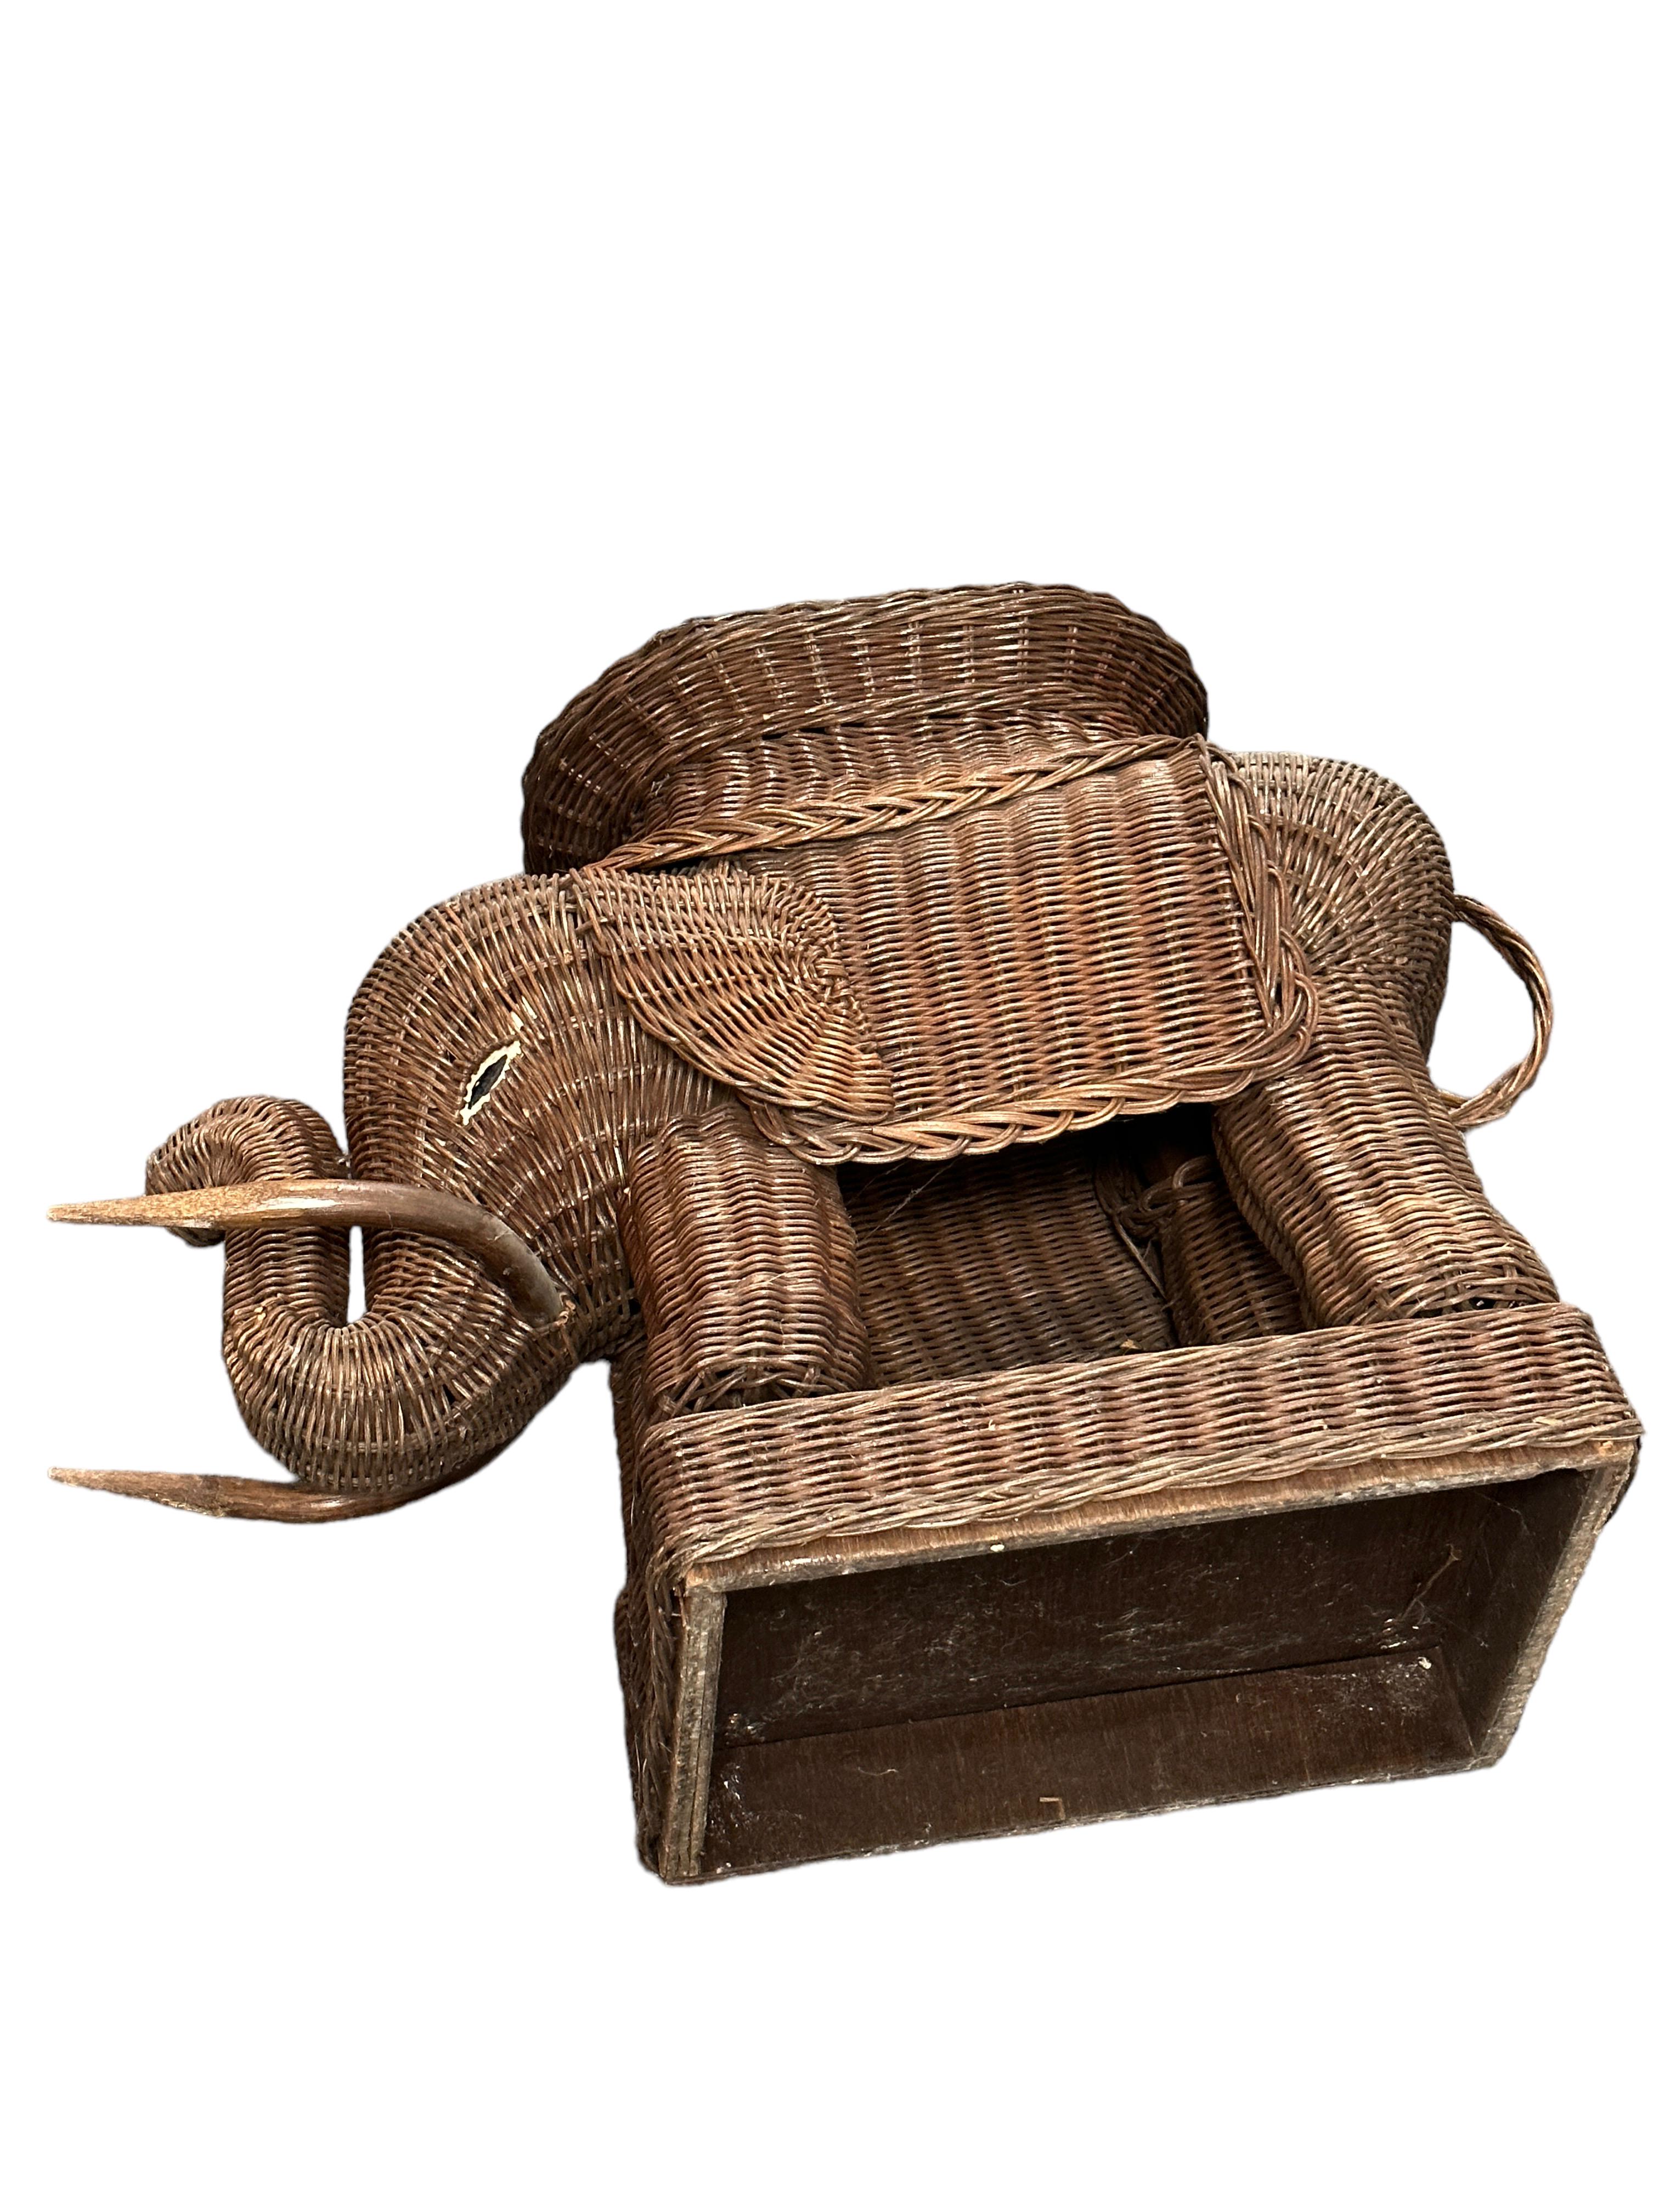 Stunning Rattan Wicker Elephant Side Table with Tray, France, 1960s For Sale 5